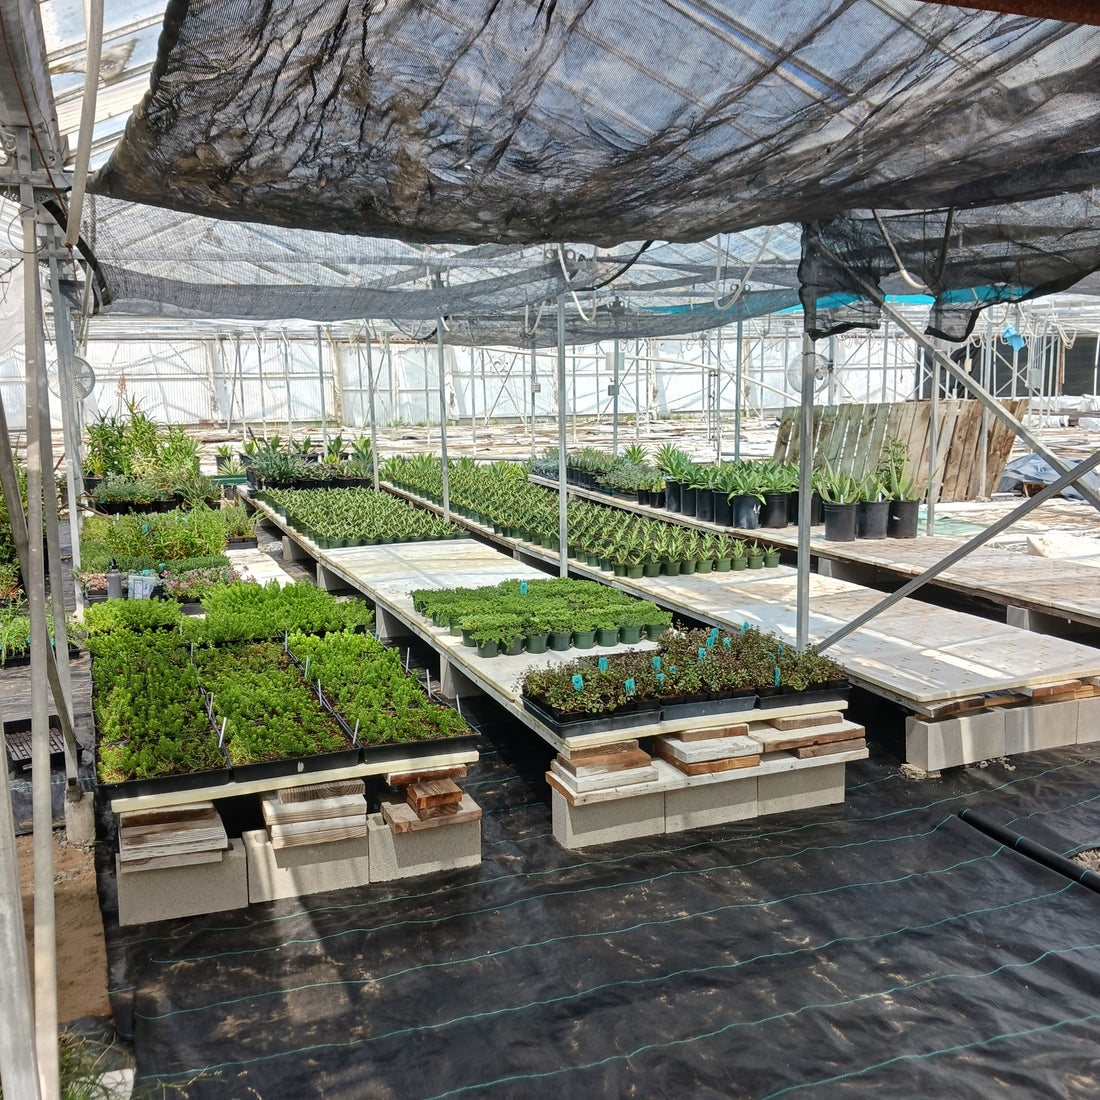 Expanding Capacity at the Greenhouse